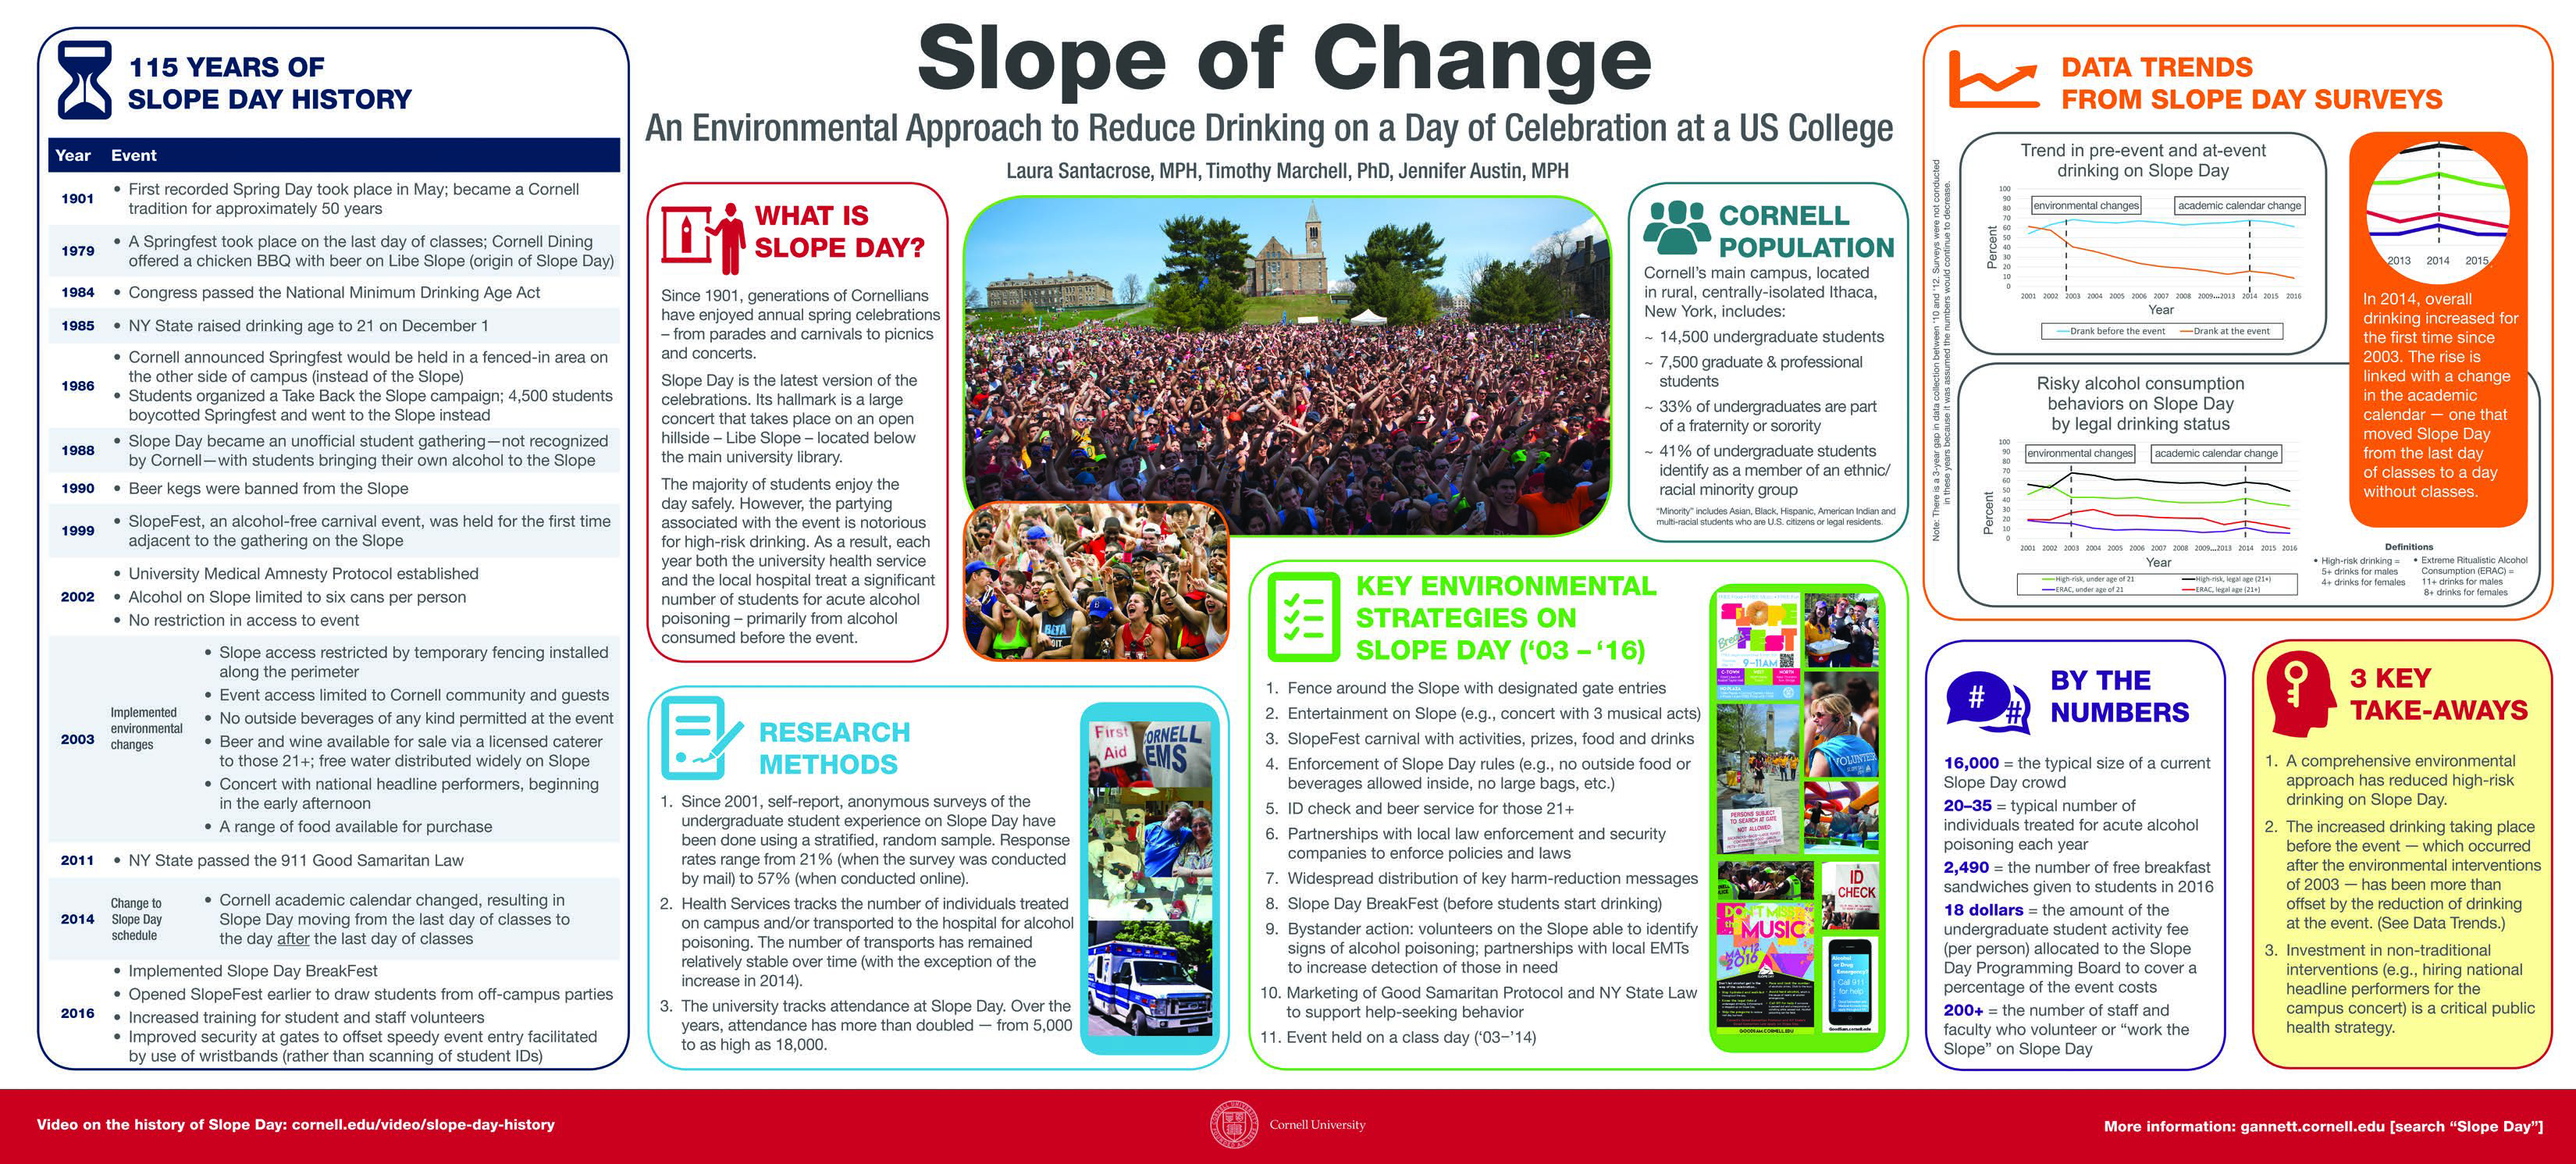 Poster showing research and strategies to reduce drinking on Slope Day